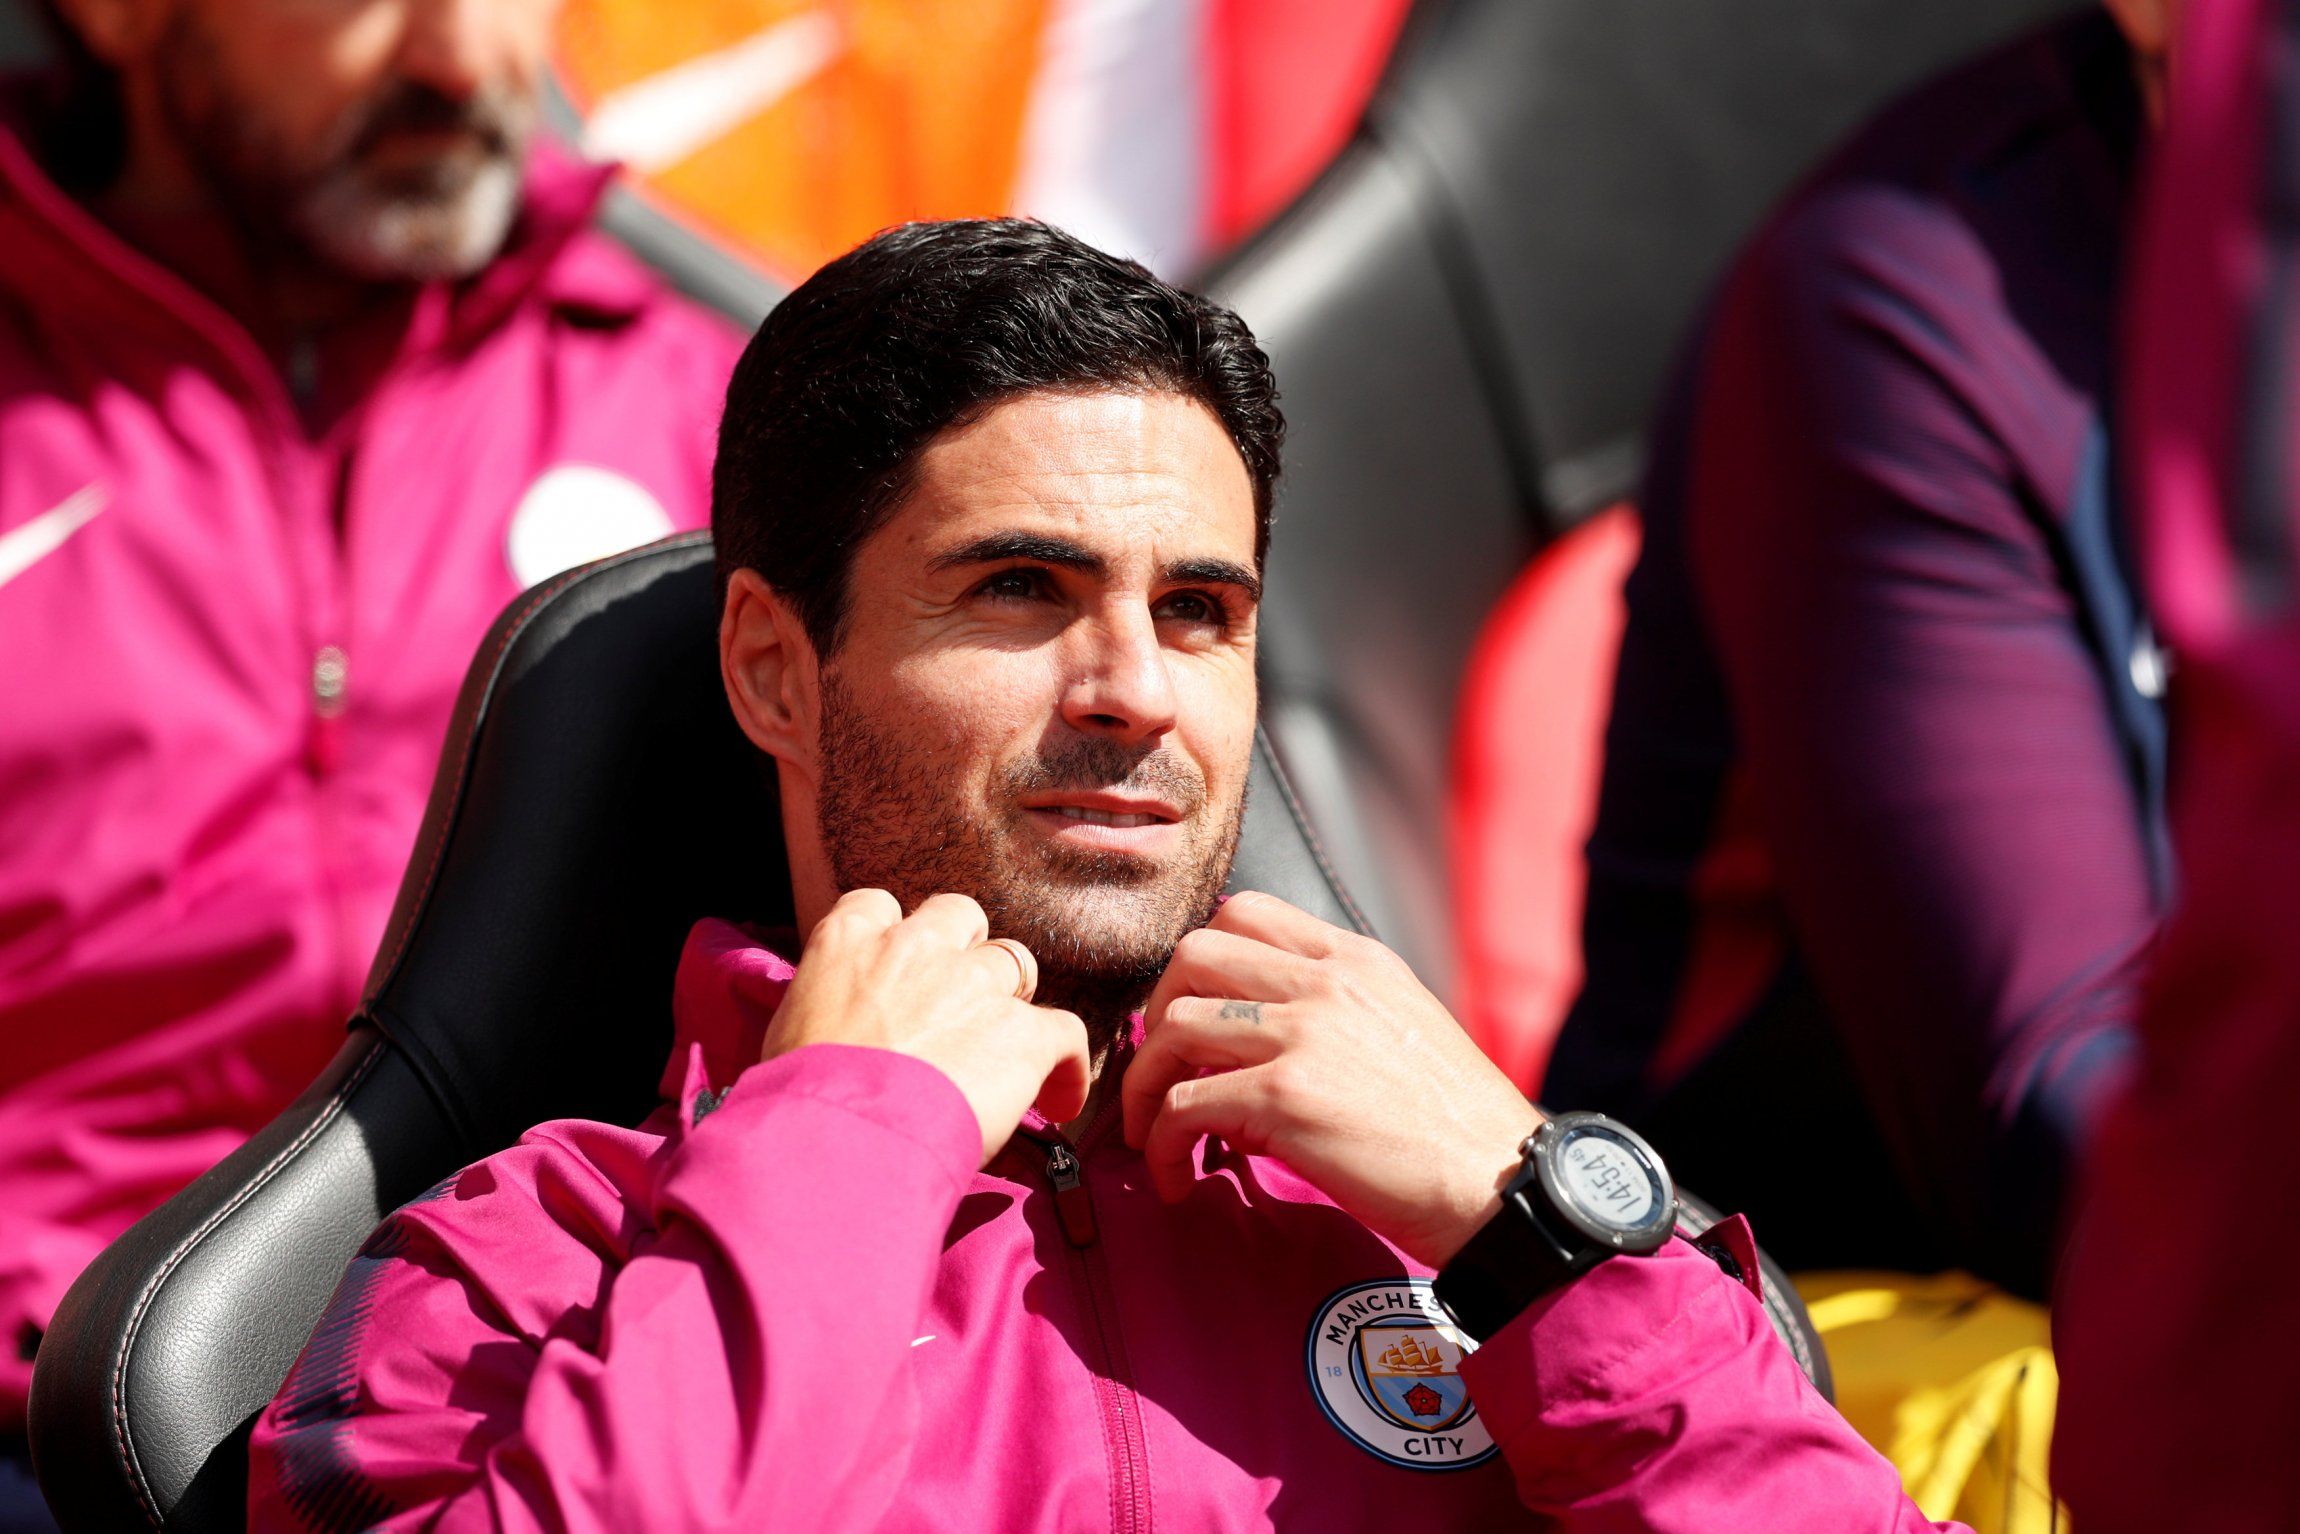 Mikel Arteta on Manchester City's bench for their Premier League game against Southampton